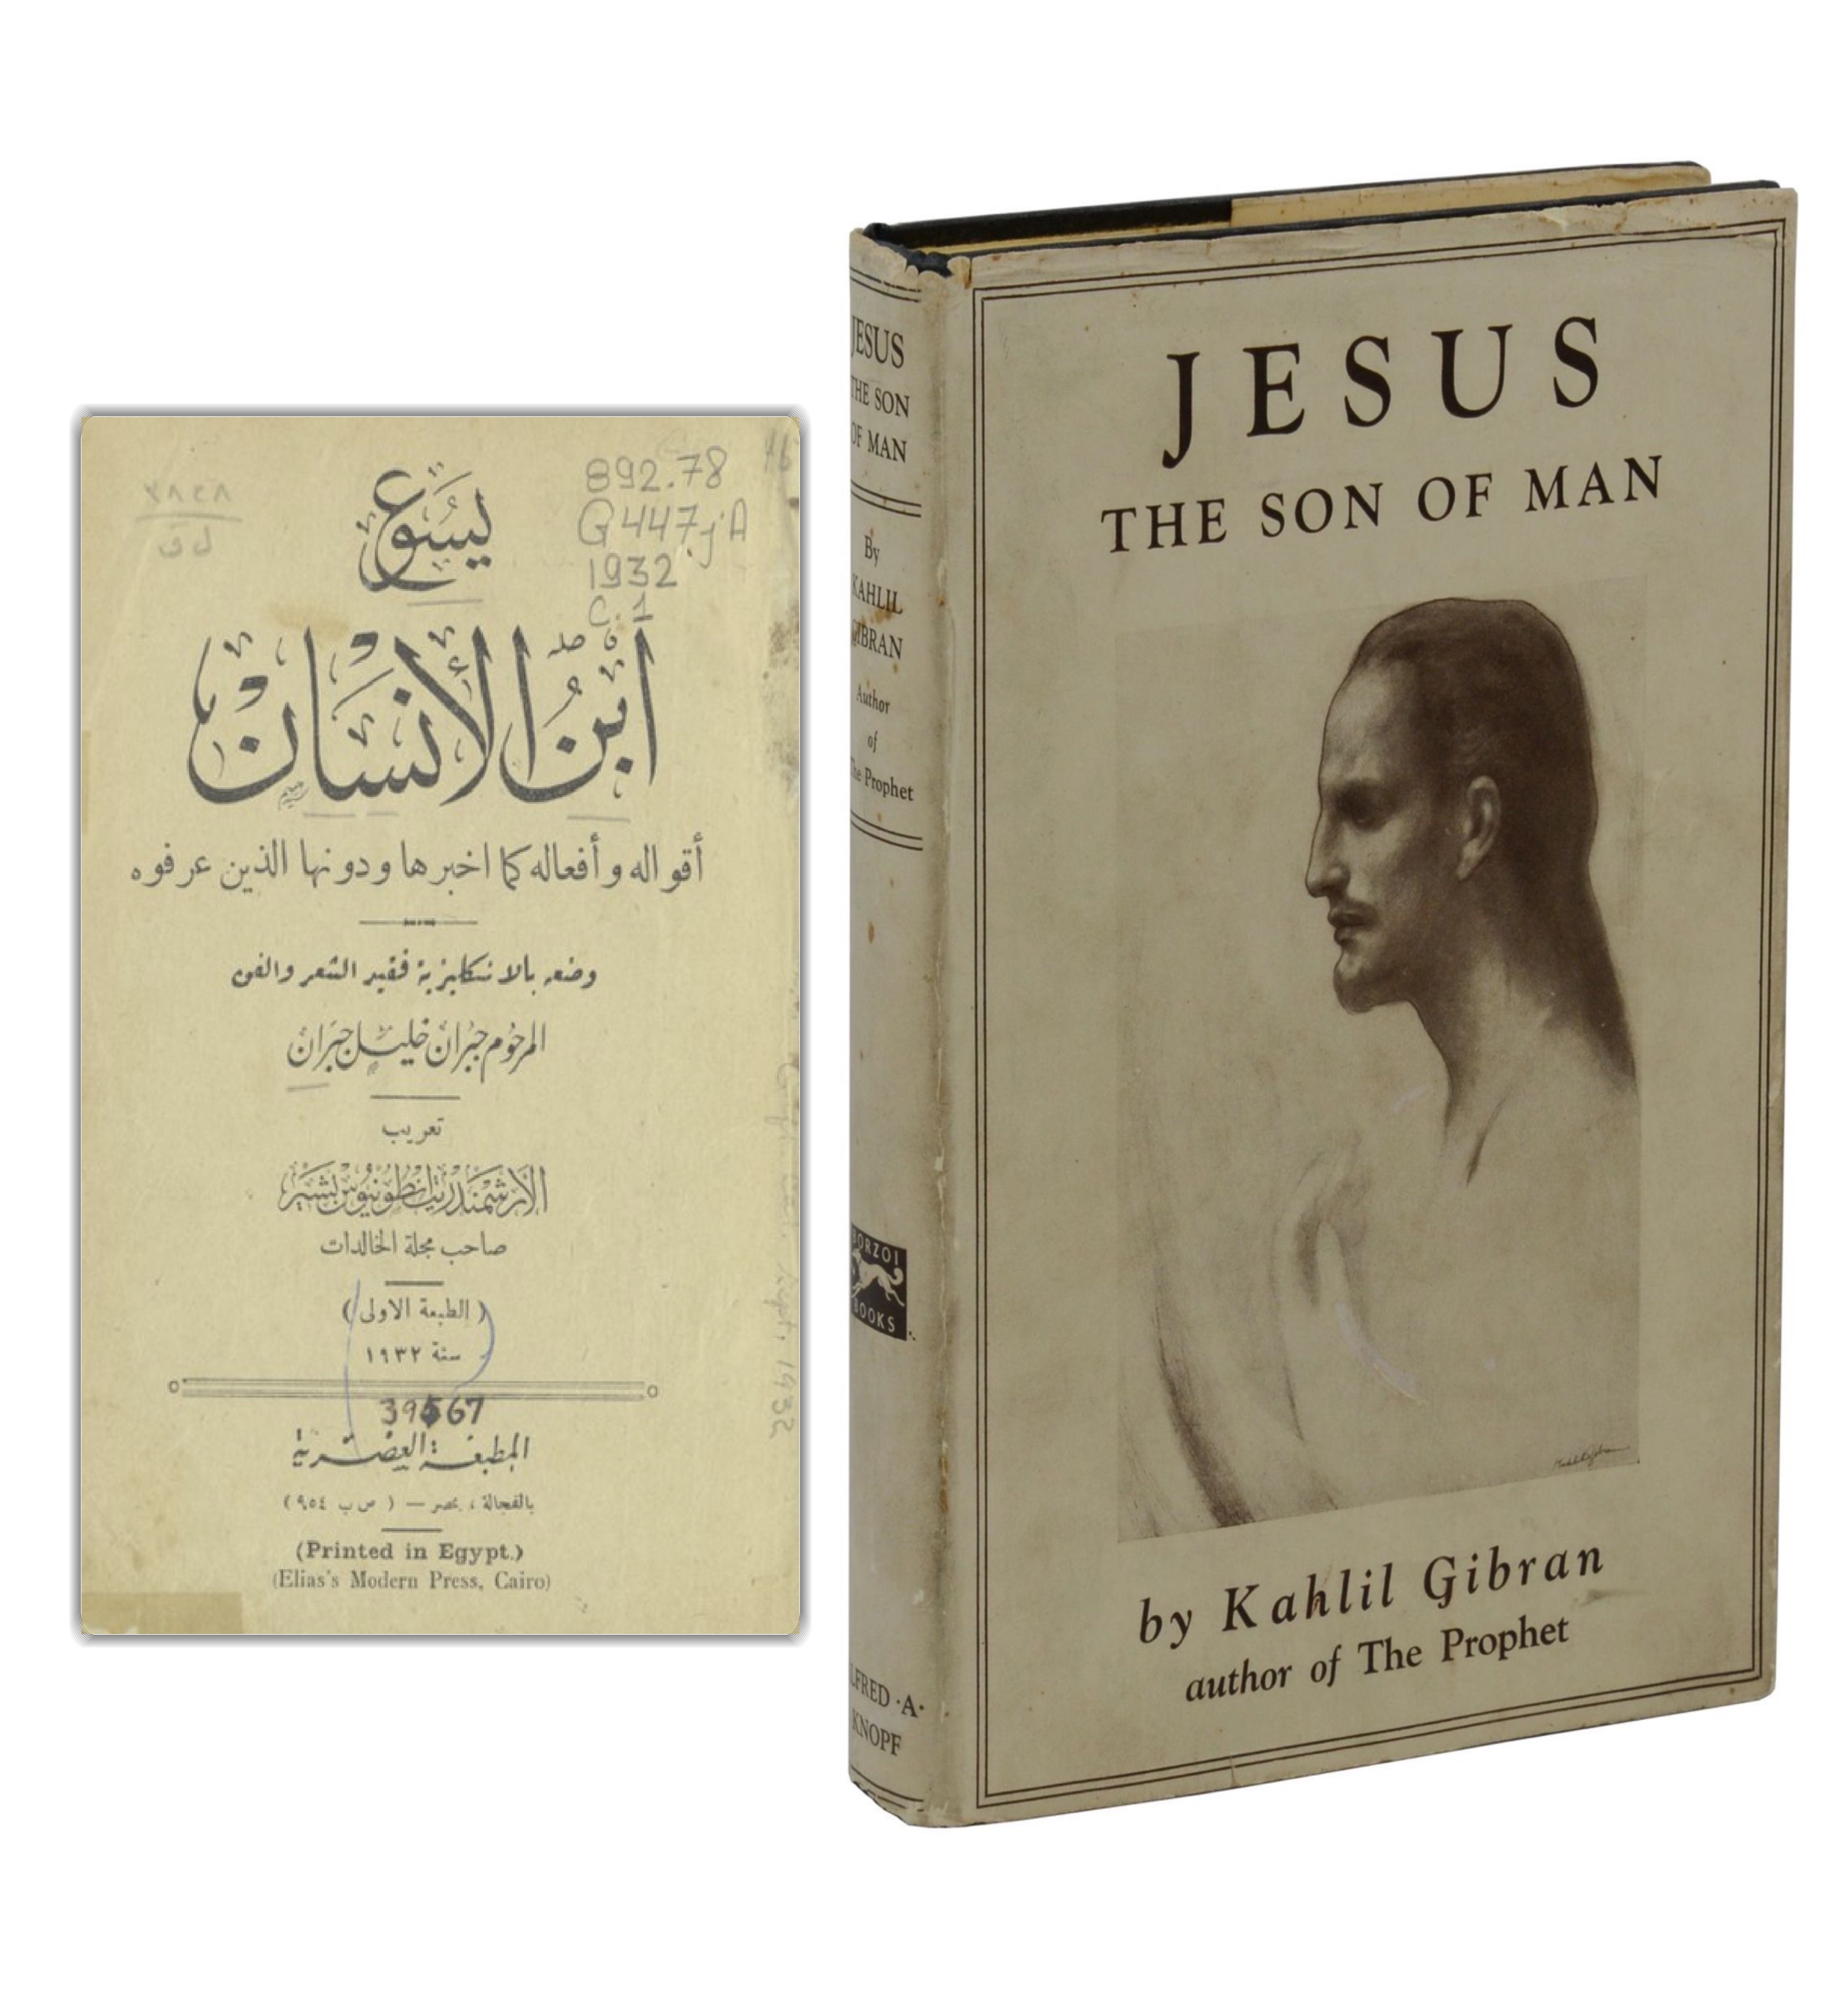 1st Arabic translation of the book Egypt 1932, (right) 1st edition of Jesus The Son of Man